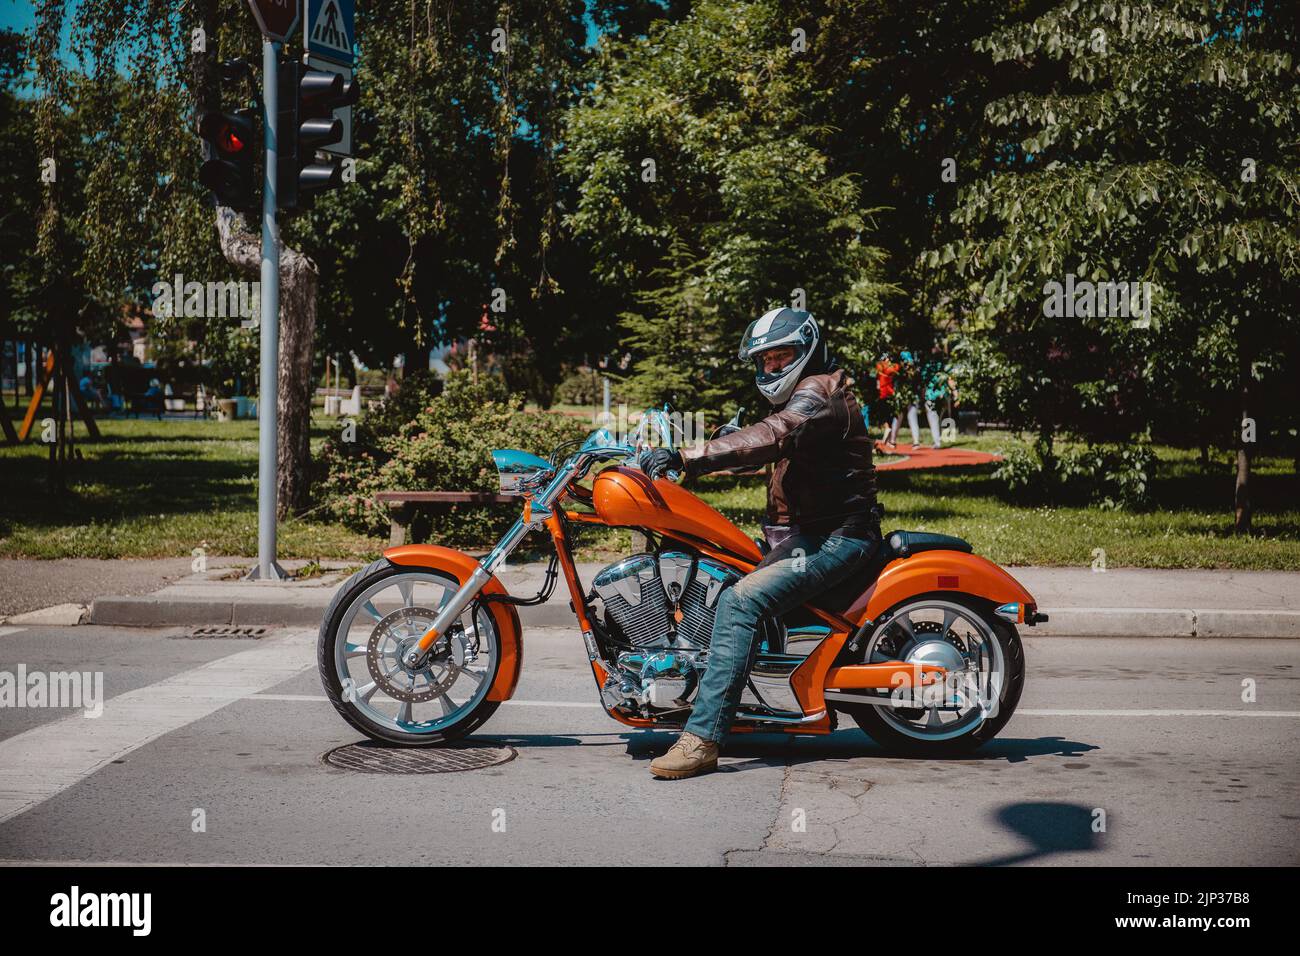 A biker with a helmet on a beautiful orange motorcycle on the road with green trees in the background Stock Photo